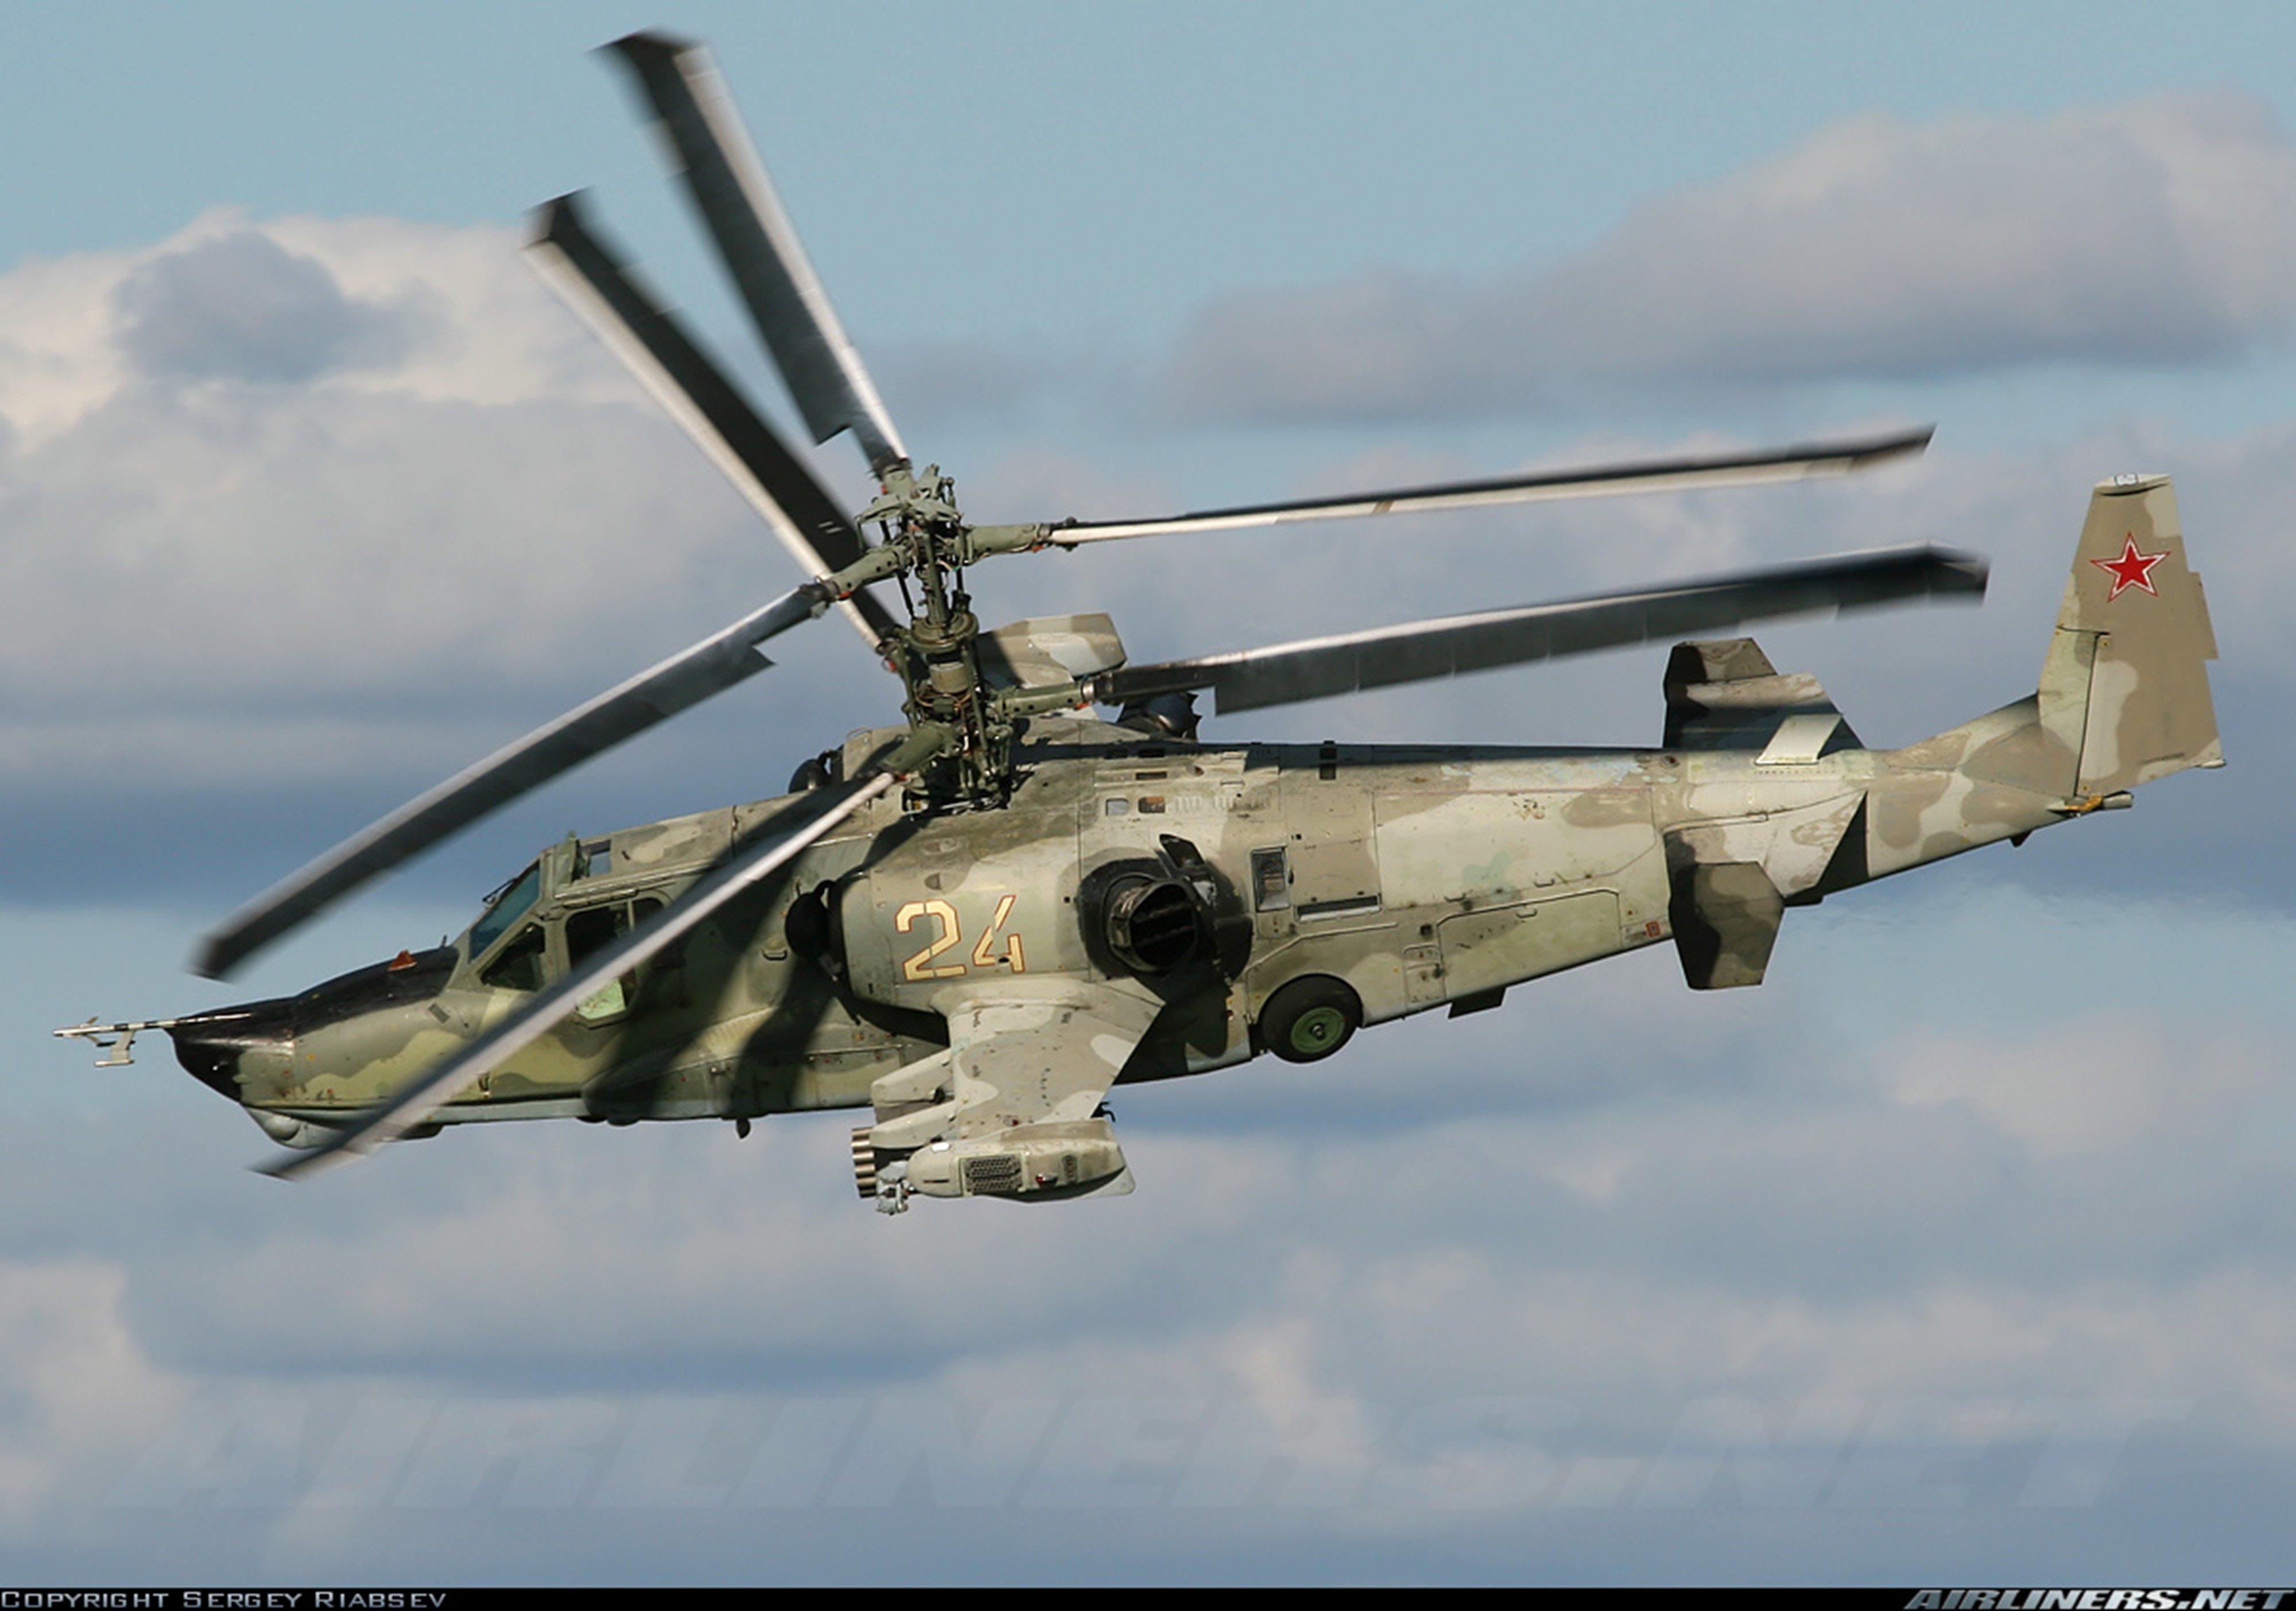 russian, Red, Star, Russia, Helicopter, Aircraft, Attack, Military, Army, Kamov, Ka 50 Wallpaper